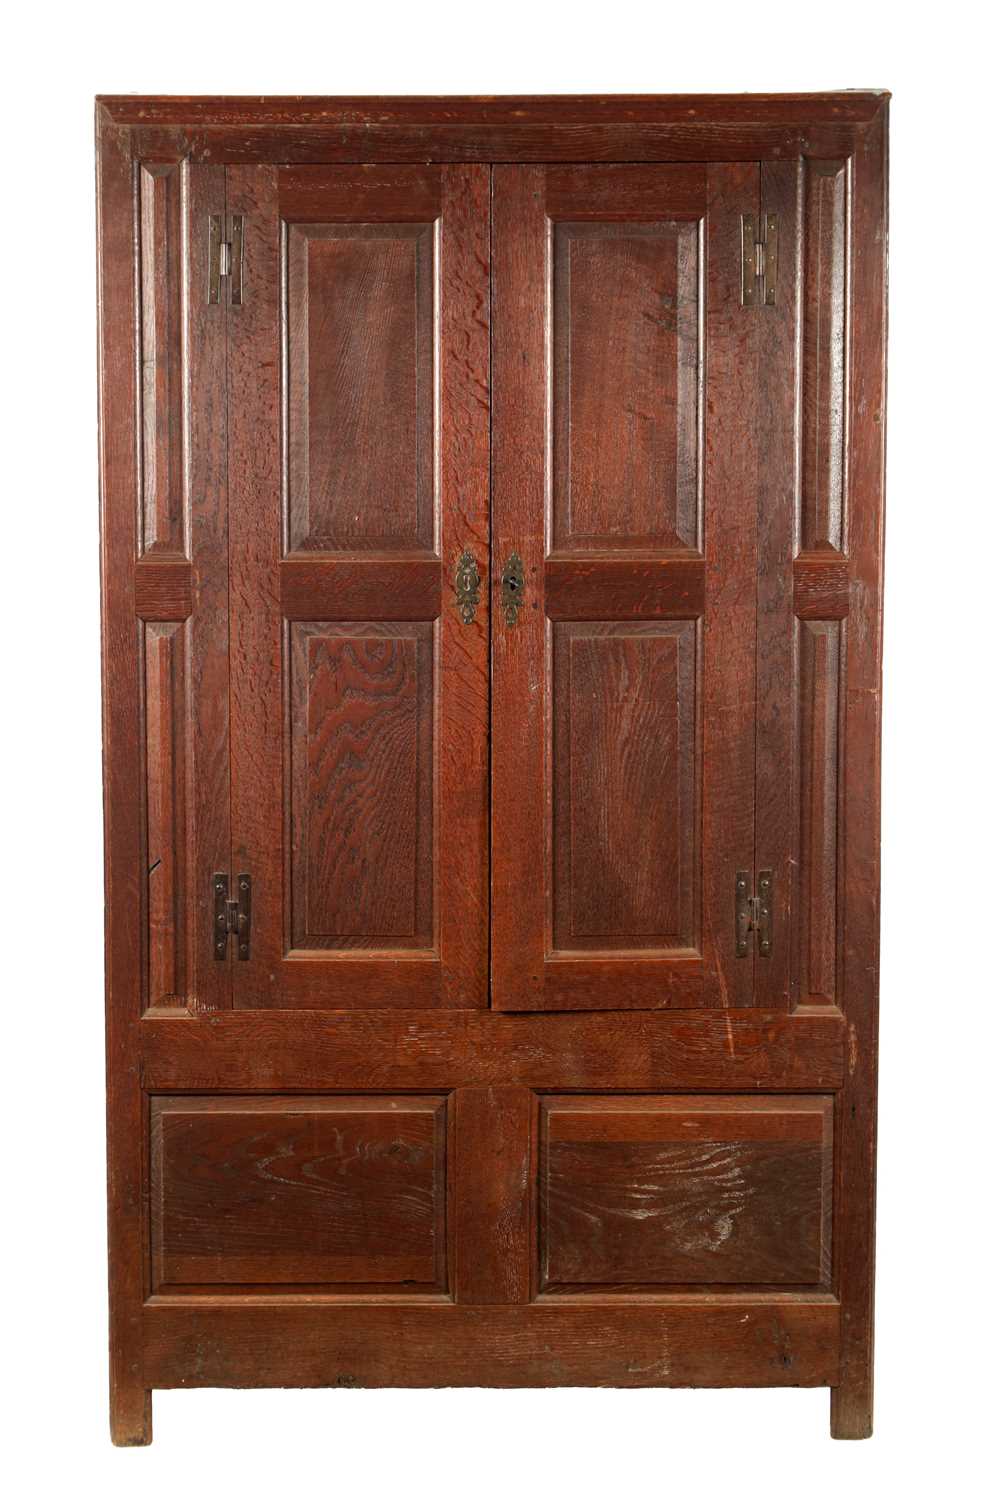 A SMALL EARLY 18TH CENTURY OAK PANELLED CUPBOARD